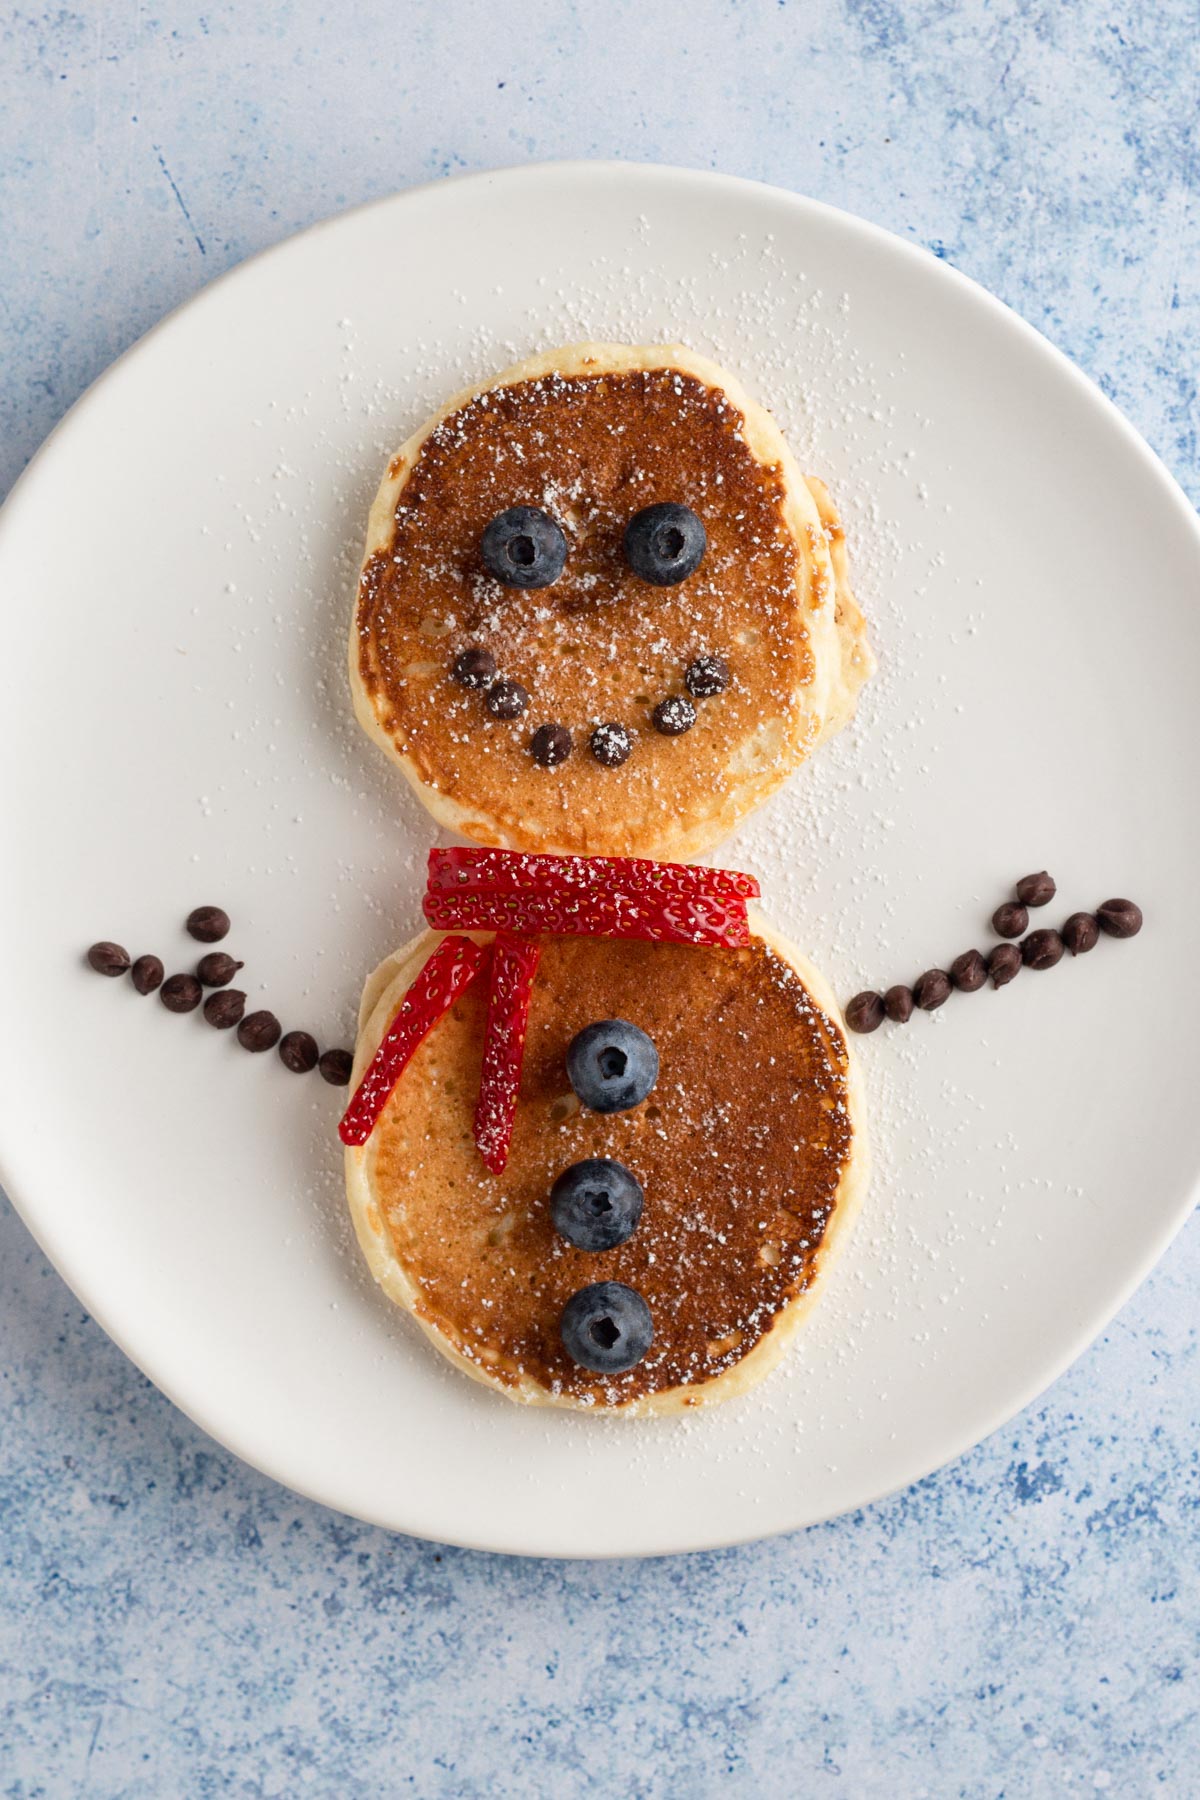 Pancakes on a white plate decorated like a snowman with berries and mini chocolate chips.